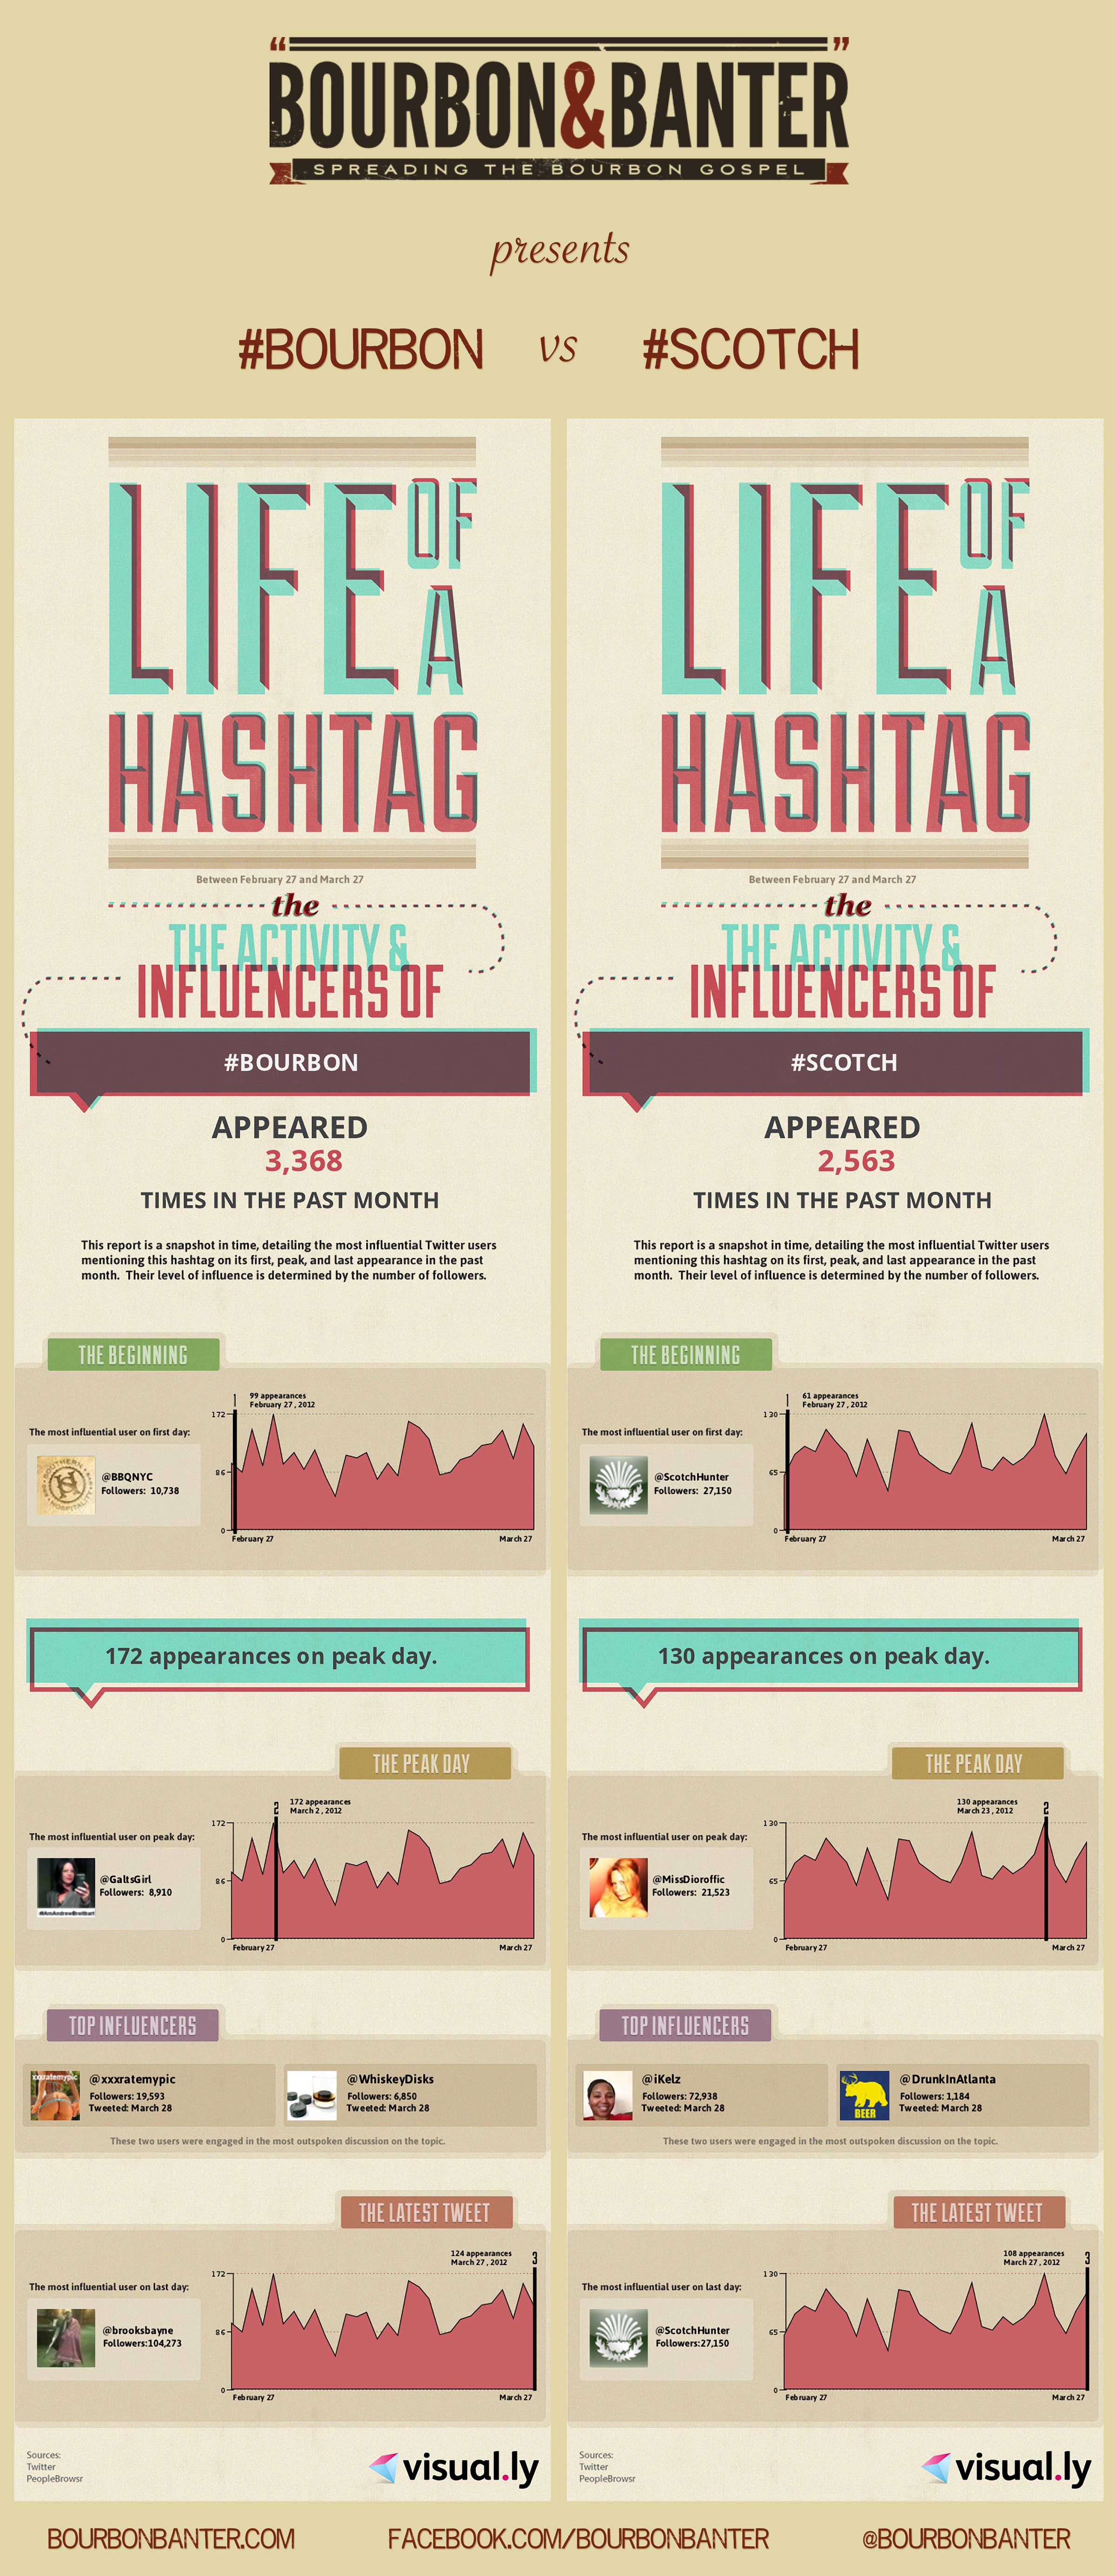 #Bourbon vs #Scotch for Twitter Supremacy - March 2012